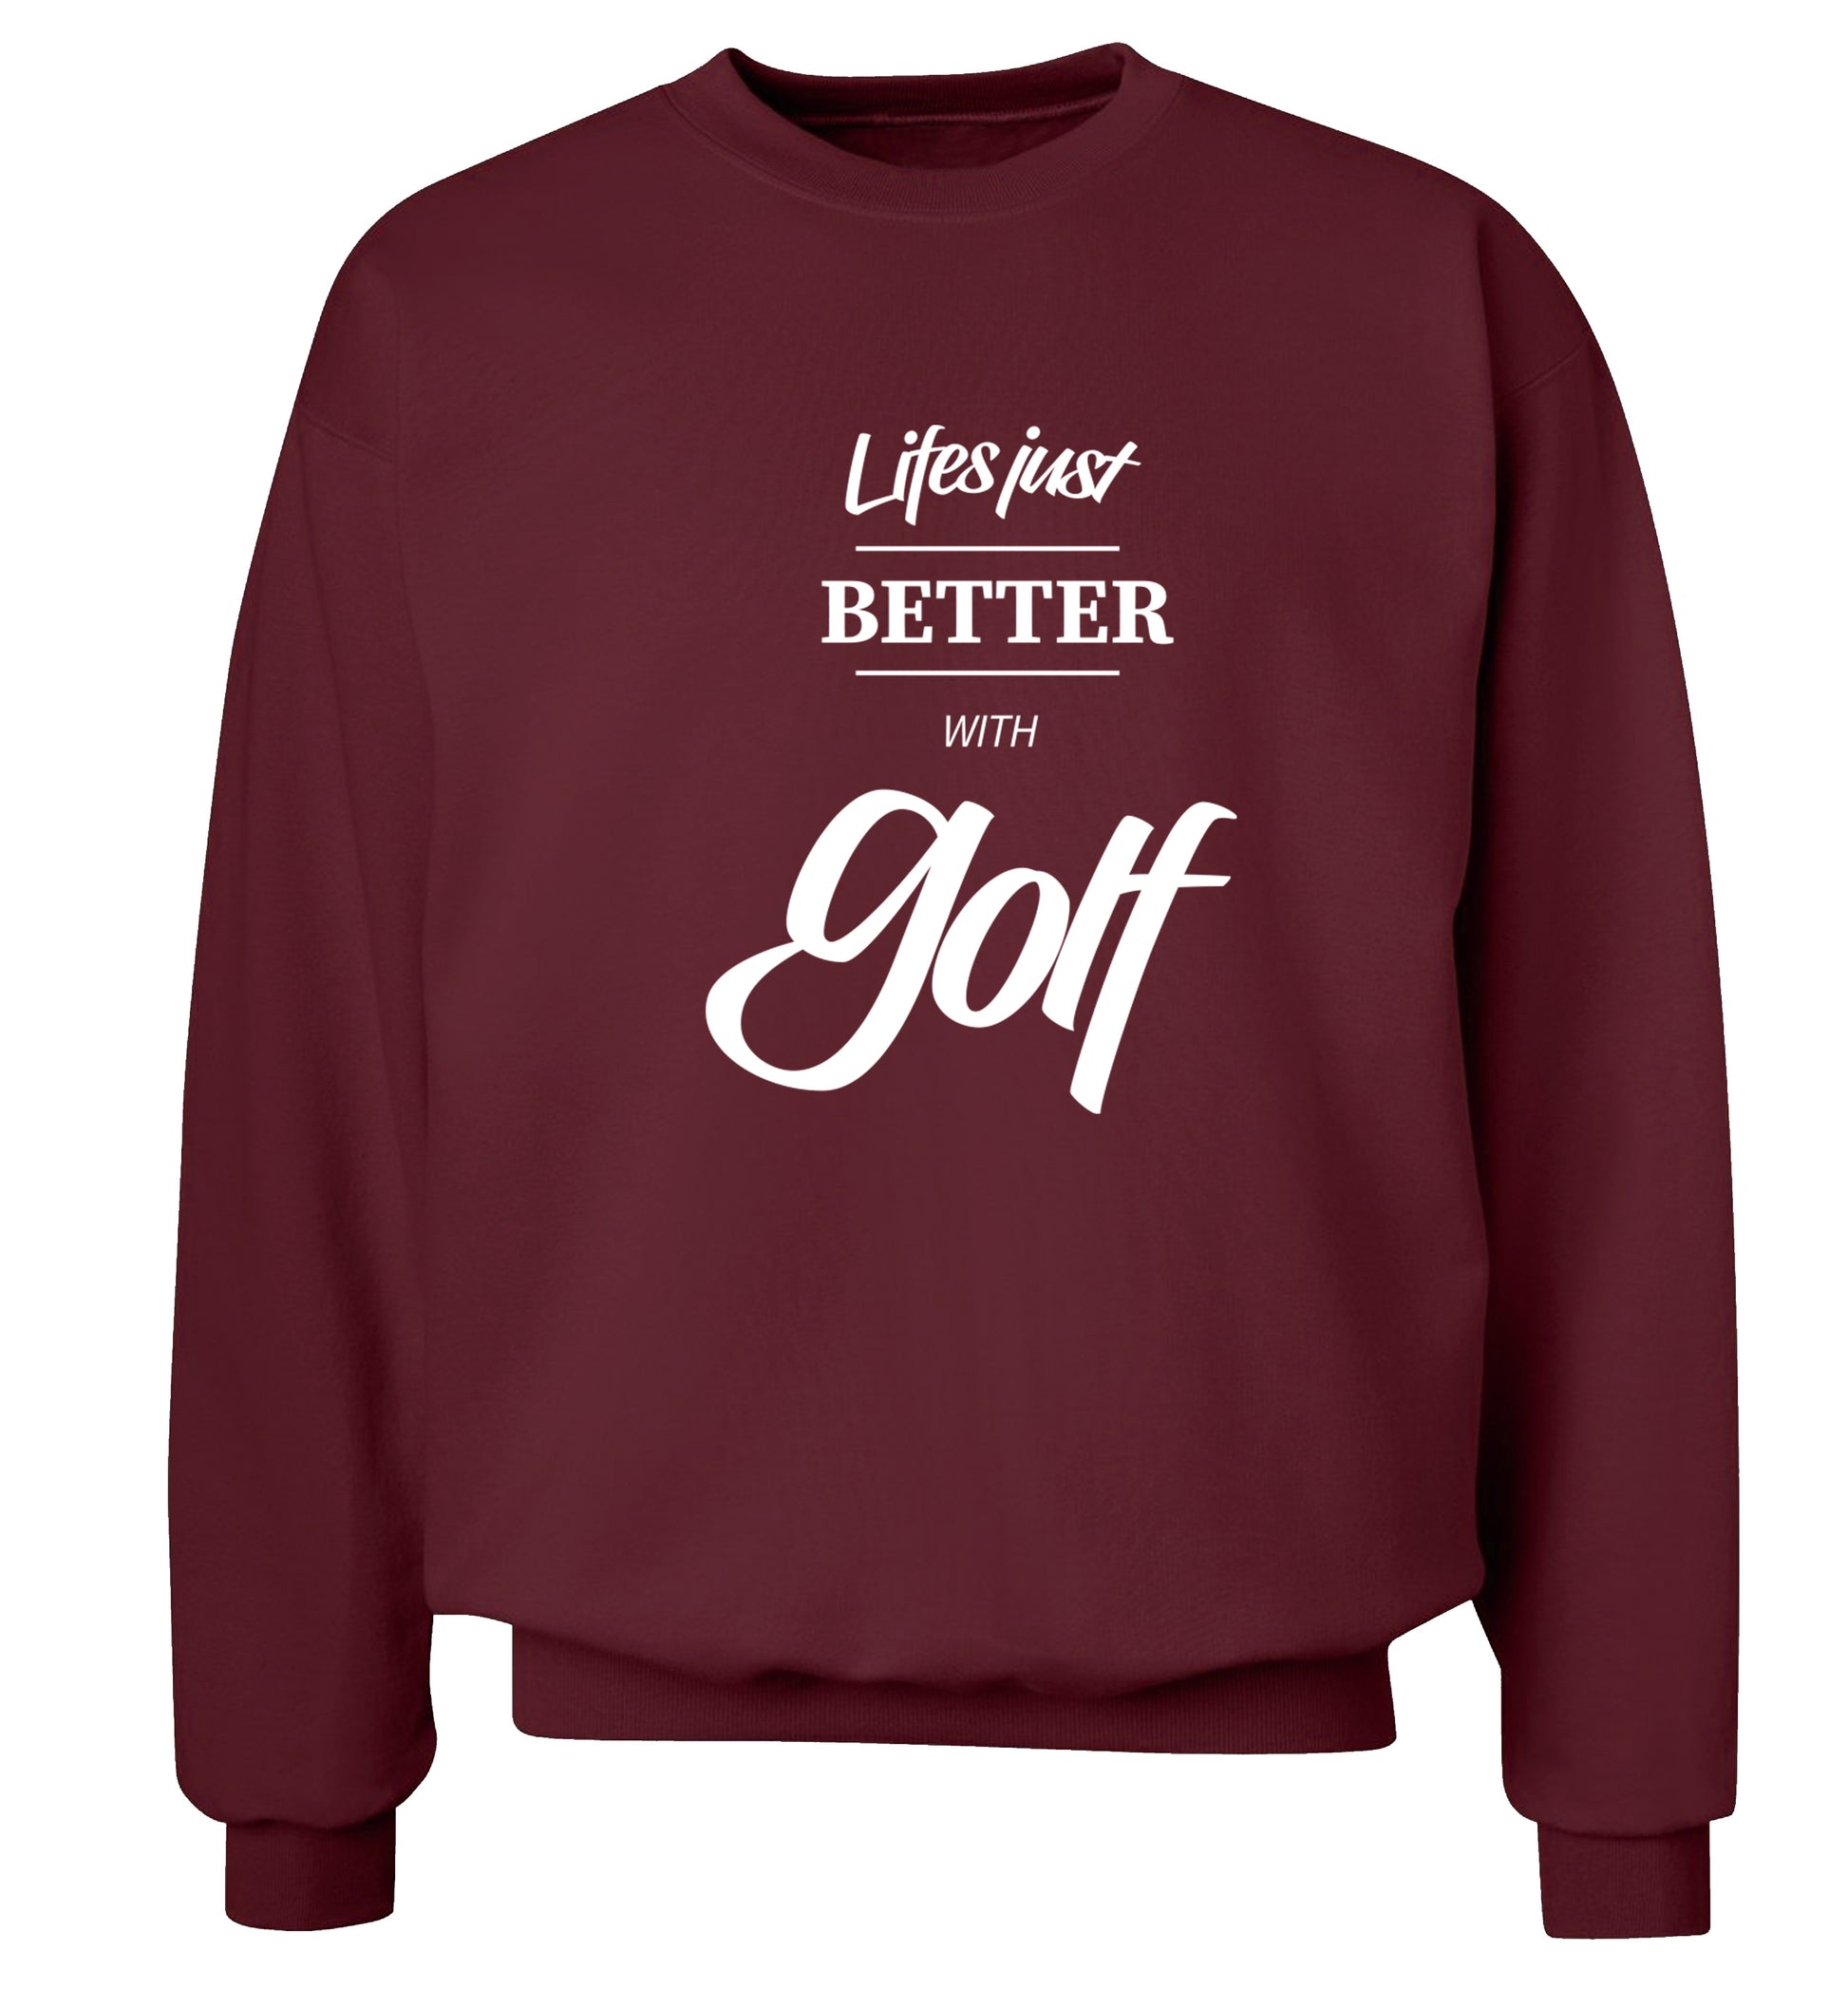 Life is better with golf Adult's unisex maroon Sweater 2XL